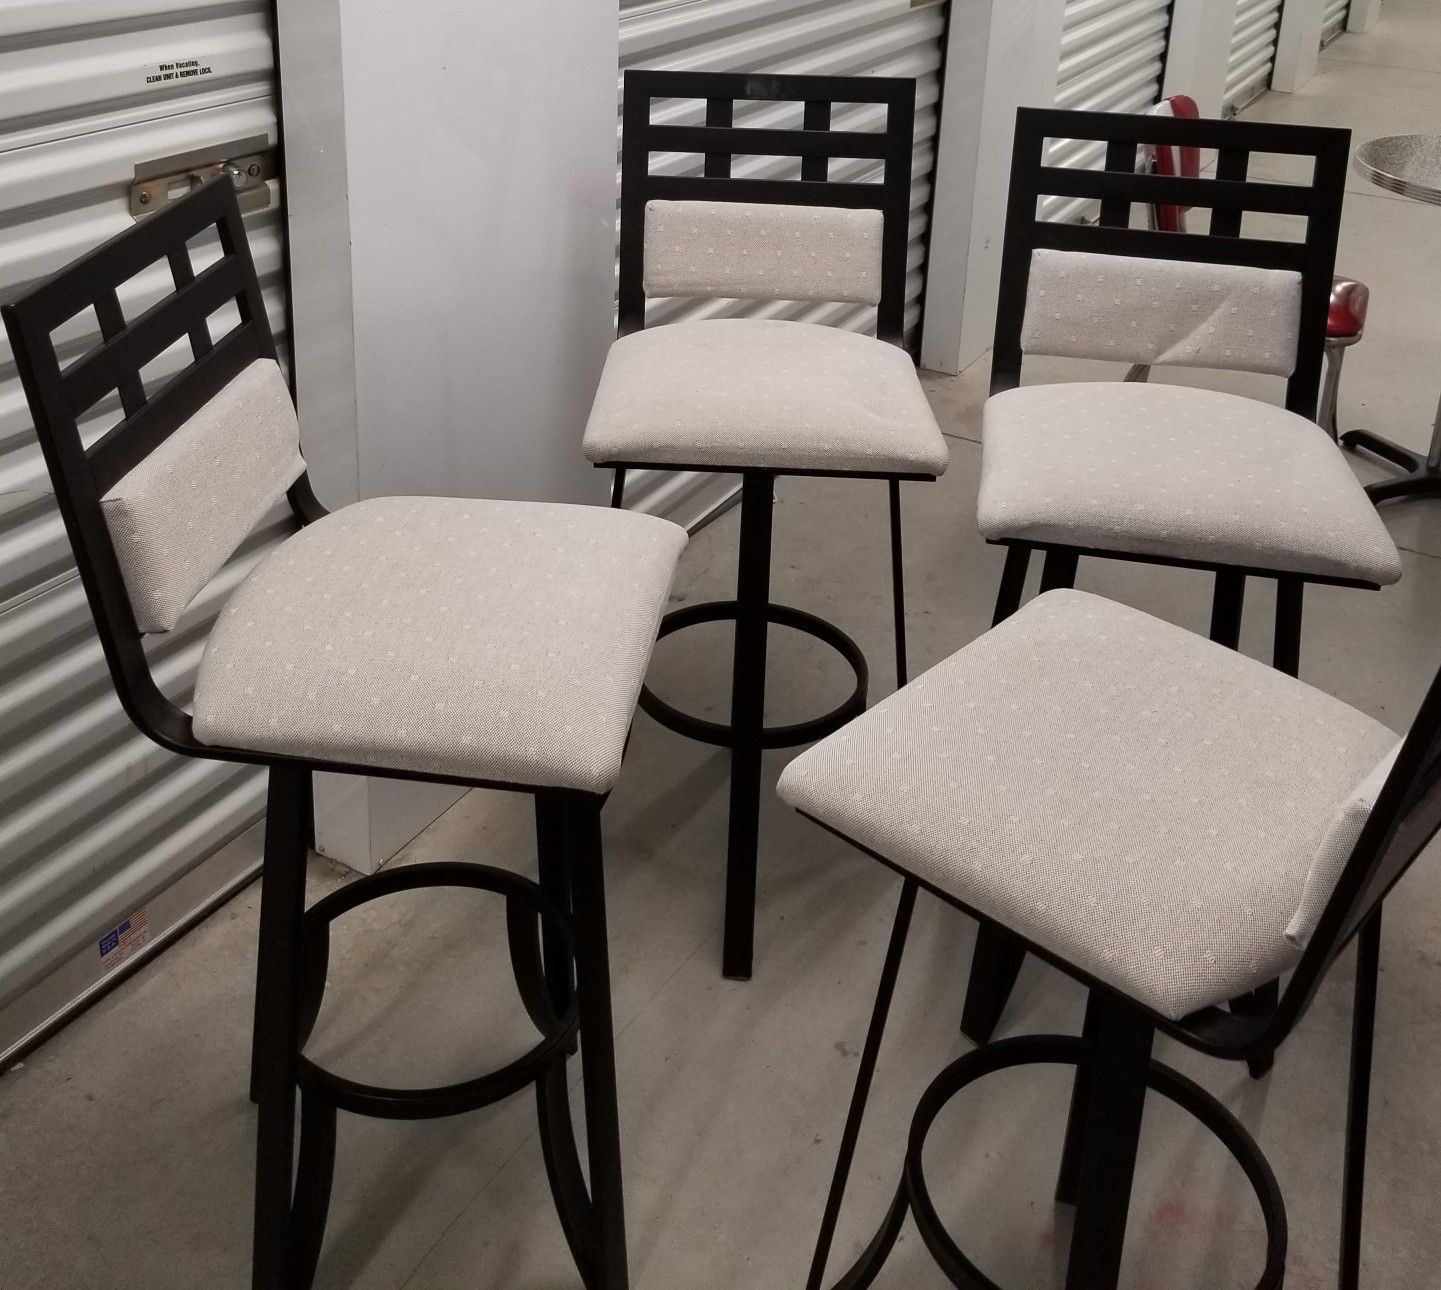 Swivel bar stools, $275 for the set or $75 each